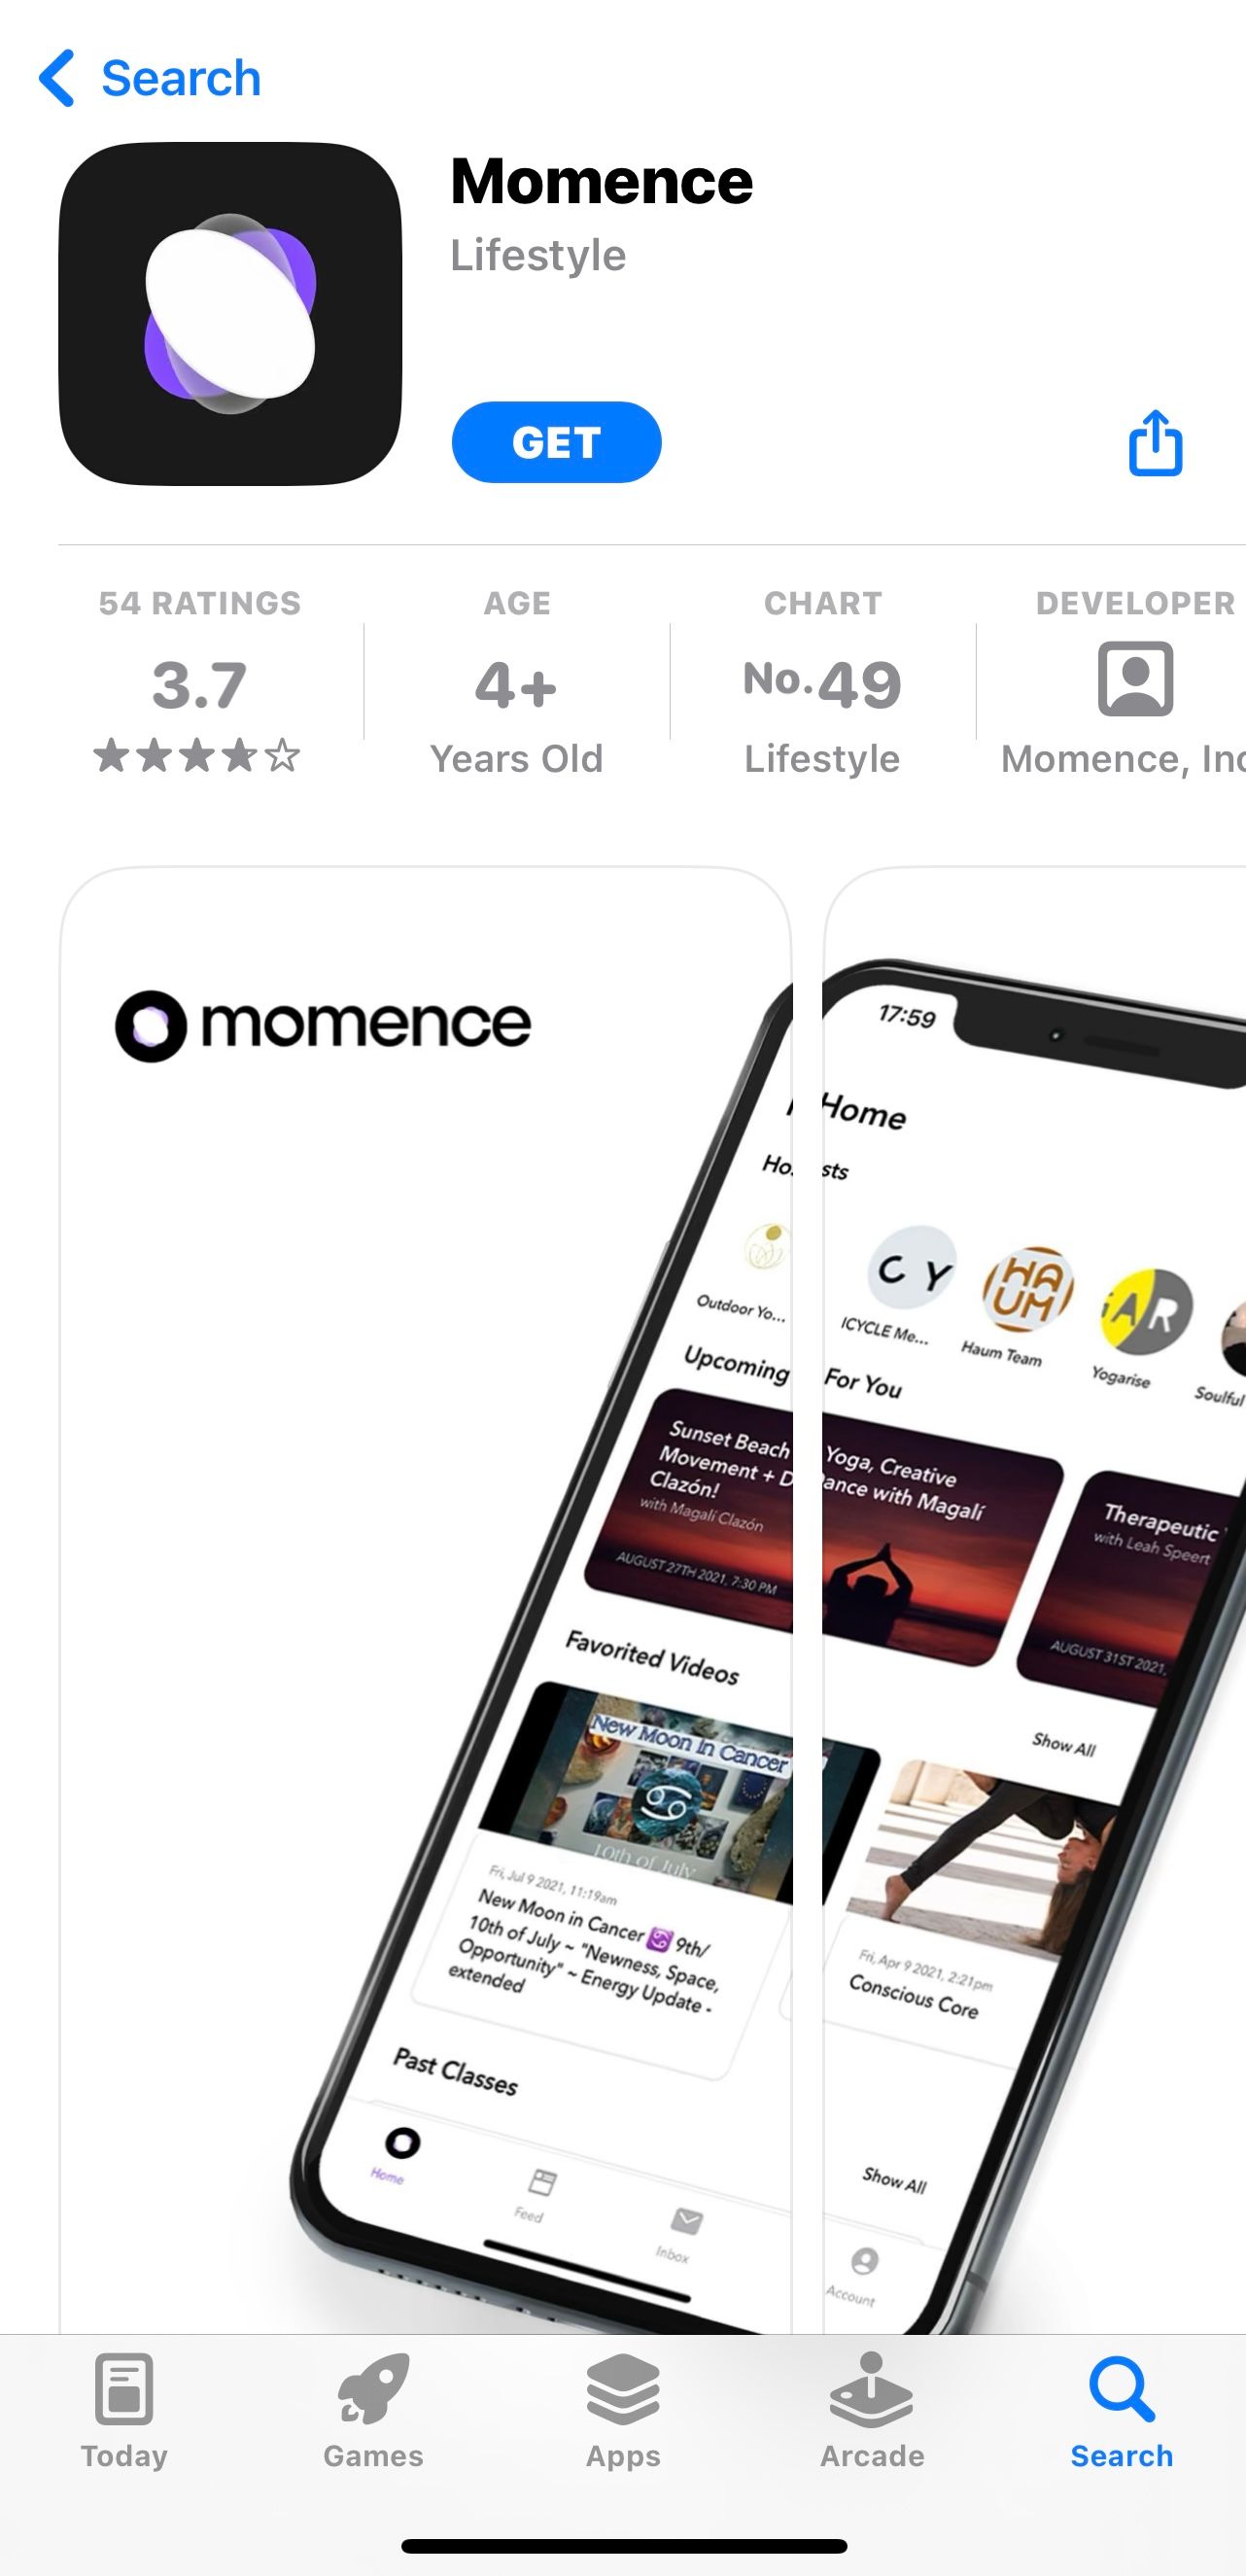 Image depicts the Momence App as featured in the Apple Store, showing prospective clients what to look for when downing loading the momence app in order to book classes.